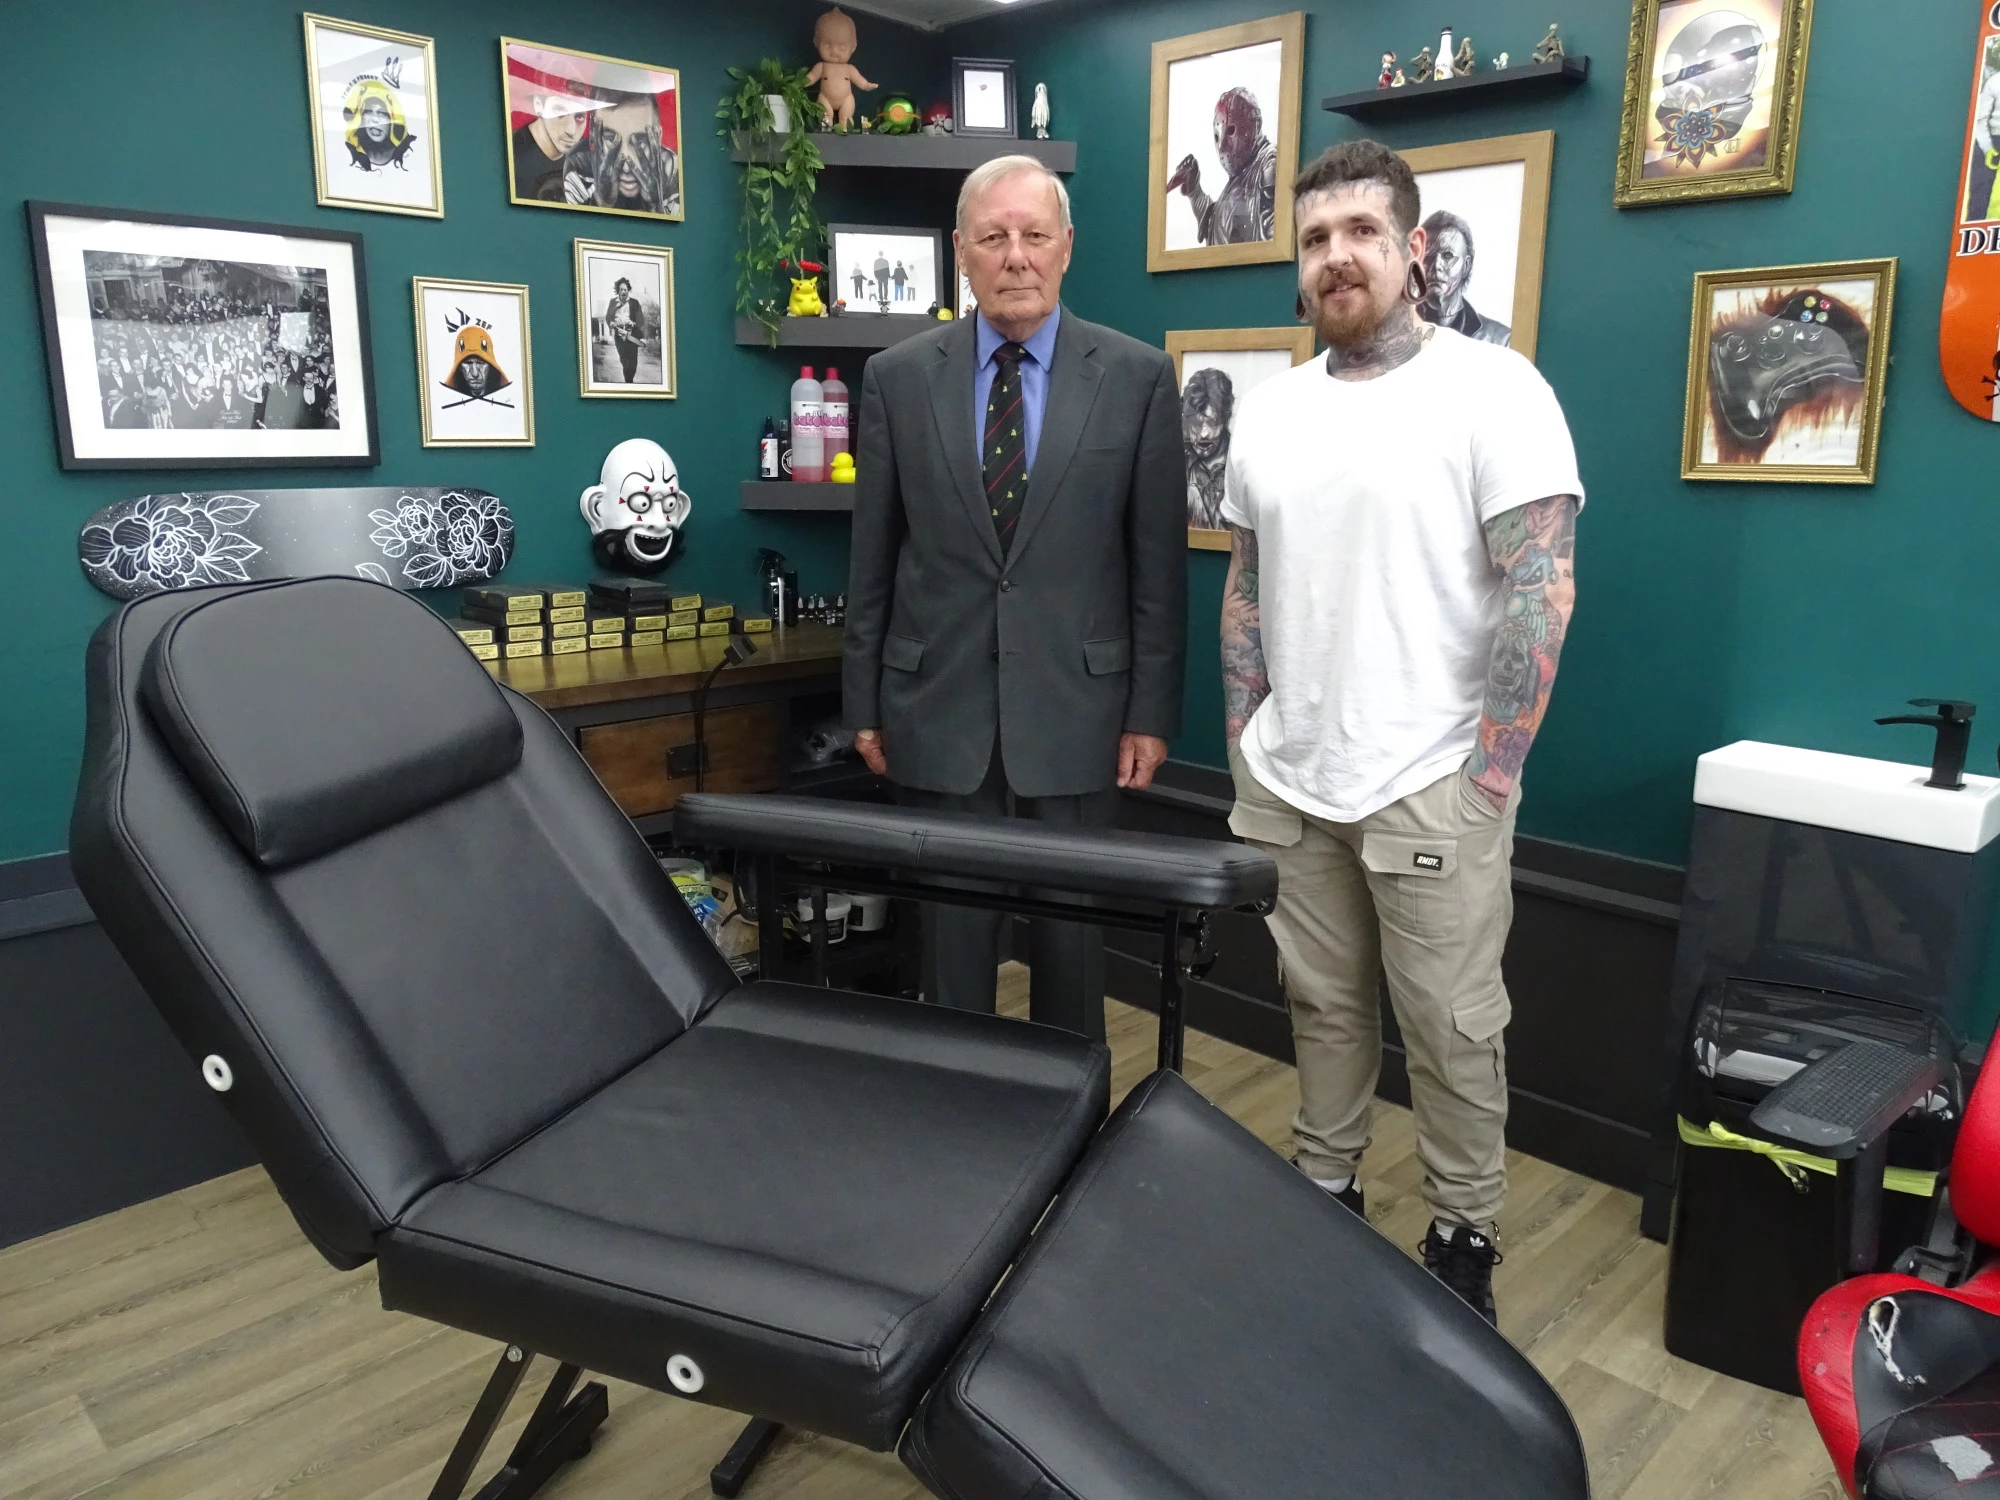 Walsall Business Support director John Punch (left) with Ink Eightyeight owner Dan Weller (right) at his new studio